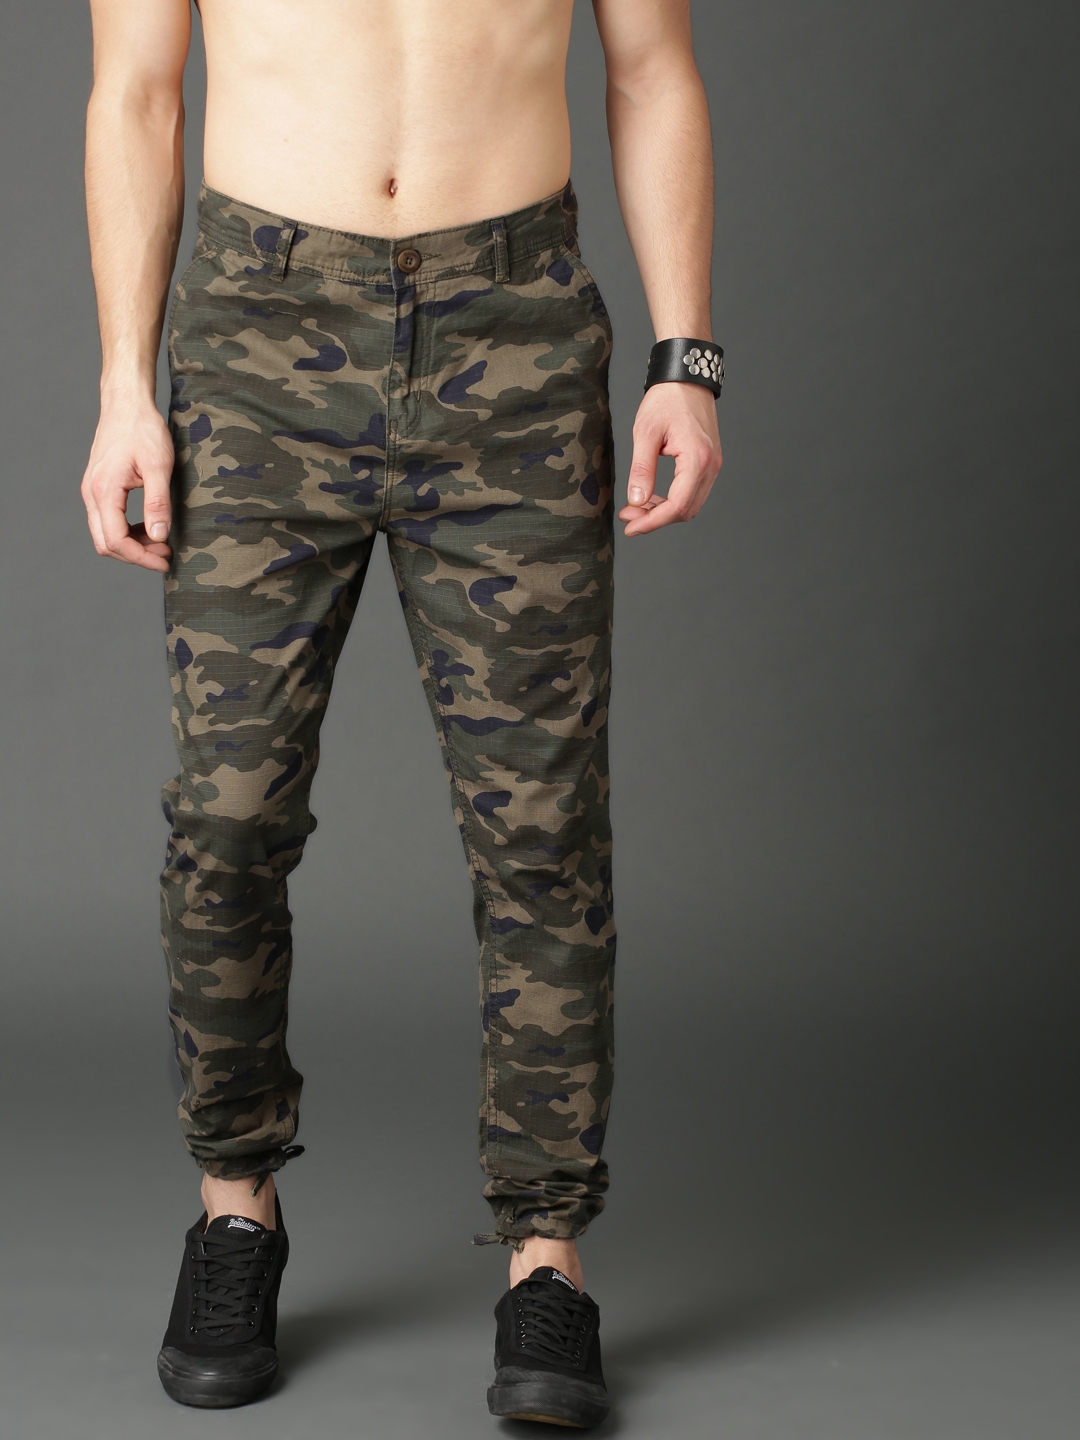 Mens Camo Cargo Pants Casual Outdoor Stretch Tapered Pant Hip Hop  Streetwear Pockets Camouflage Cargo Trousers Fashion Hippie Regular Fit  Fall Winter Outdoor Casual Long Pants  Walmartcom